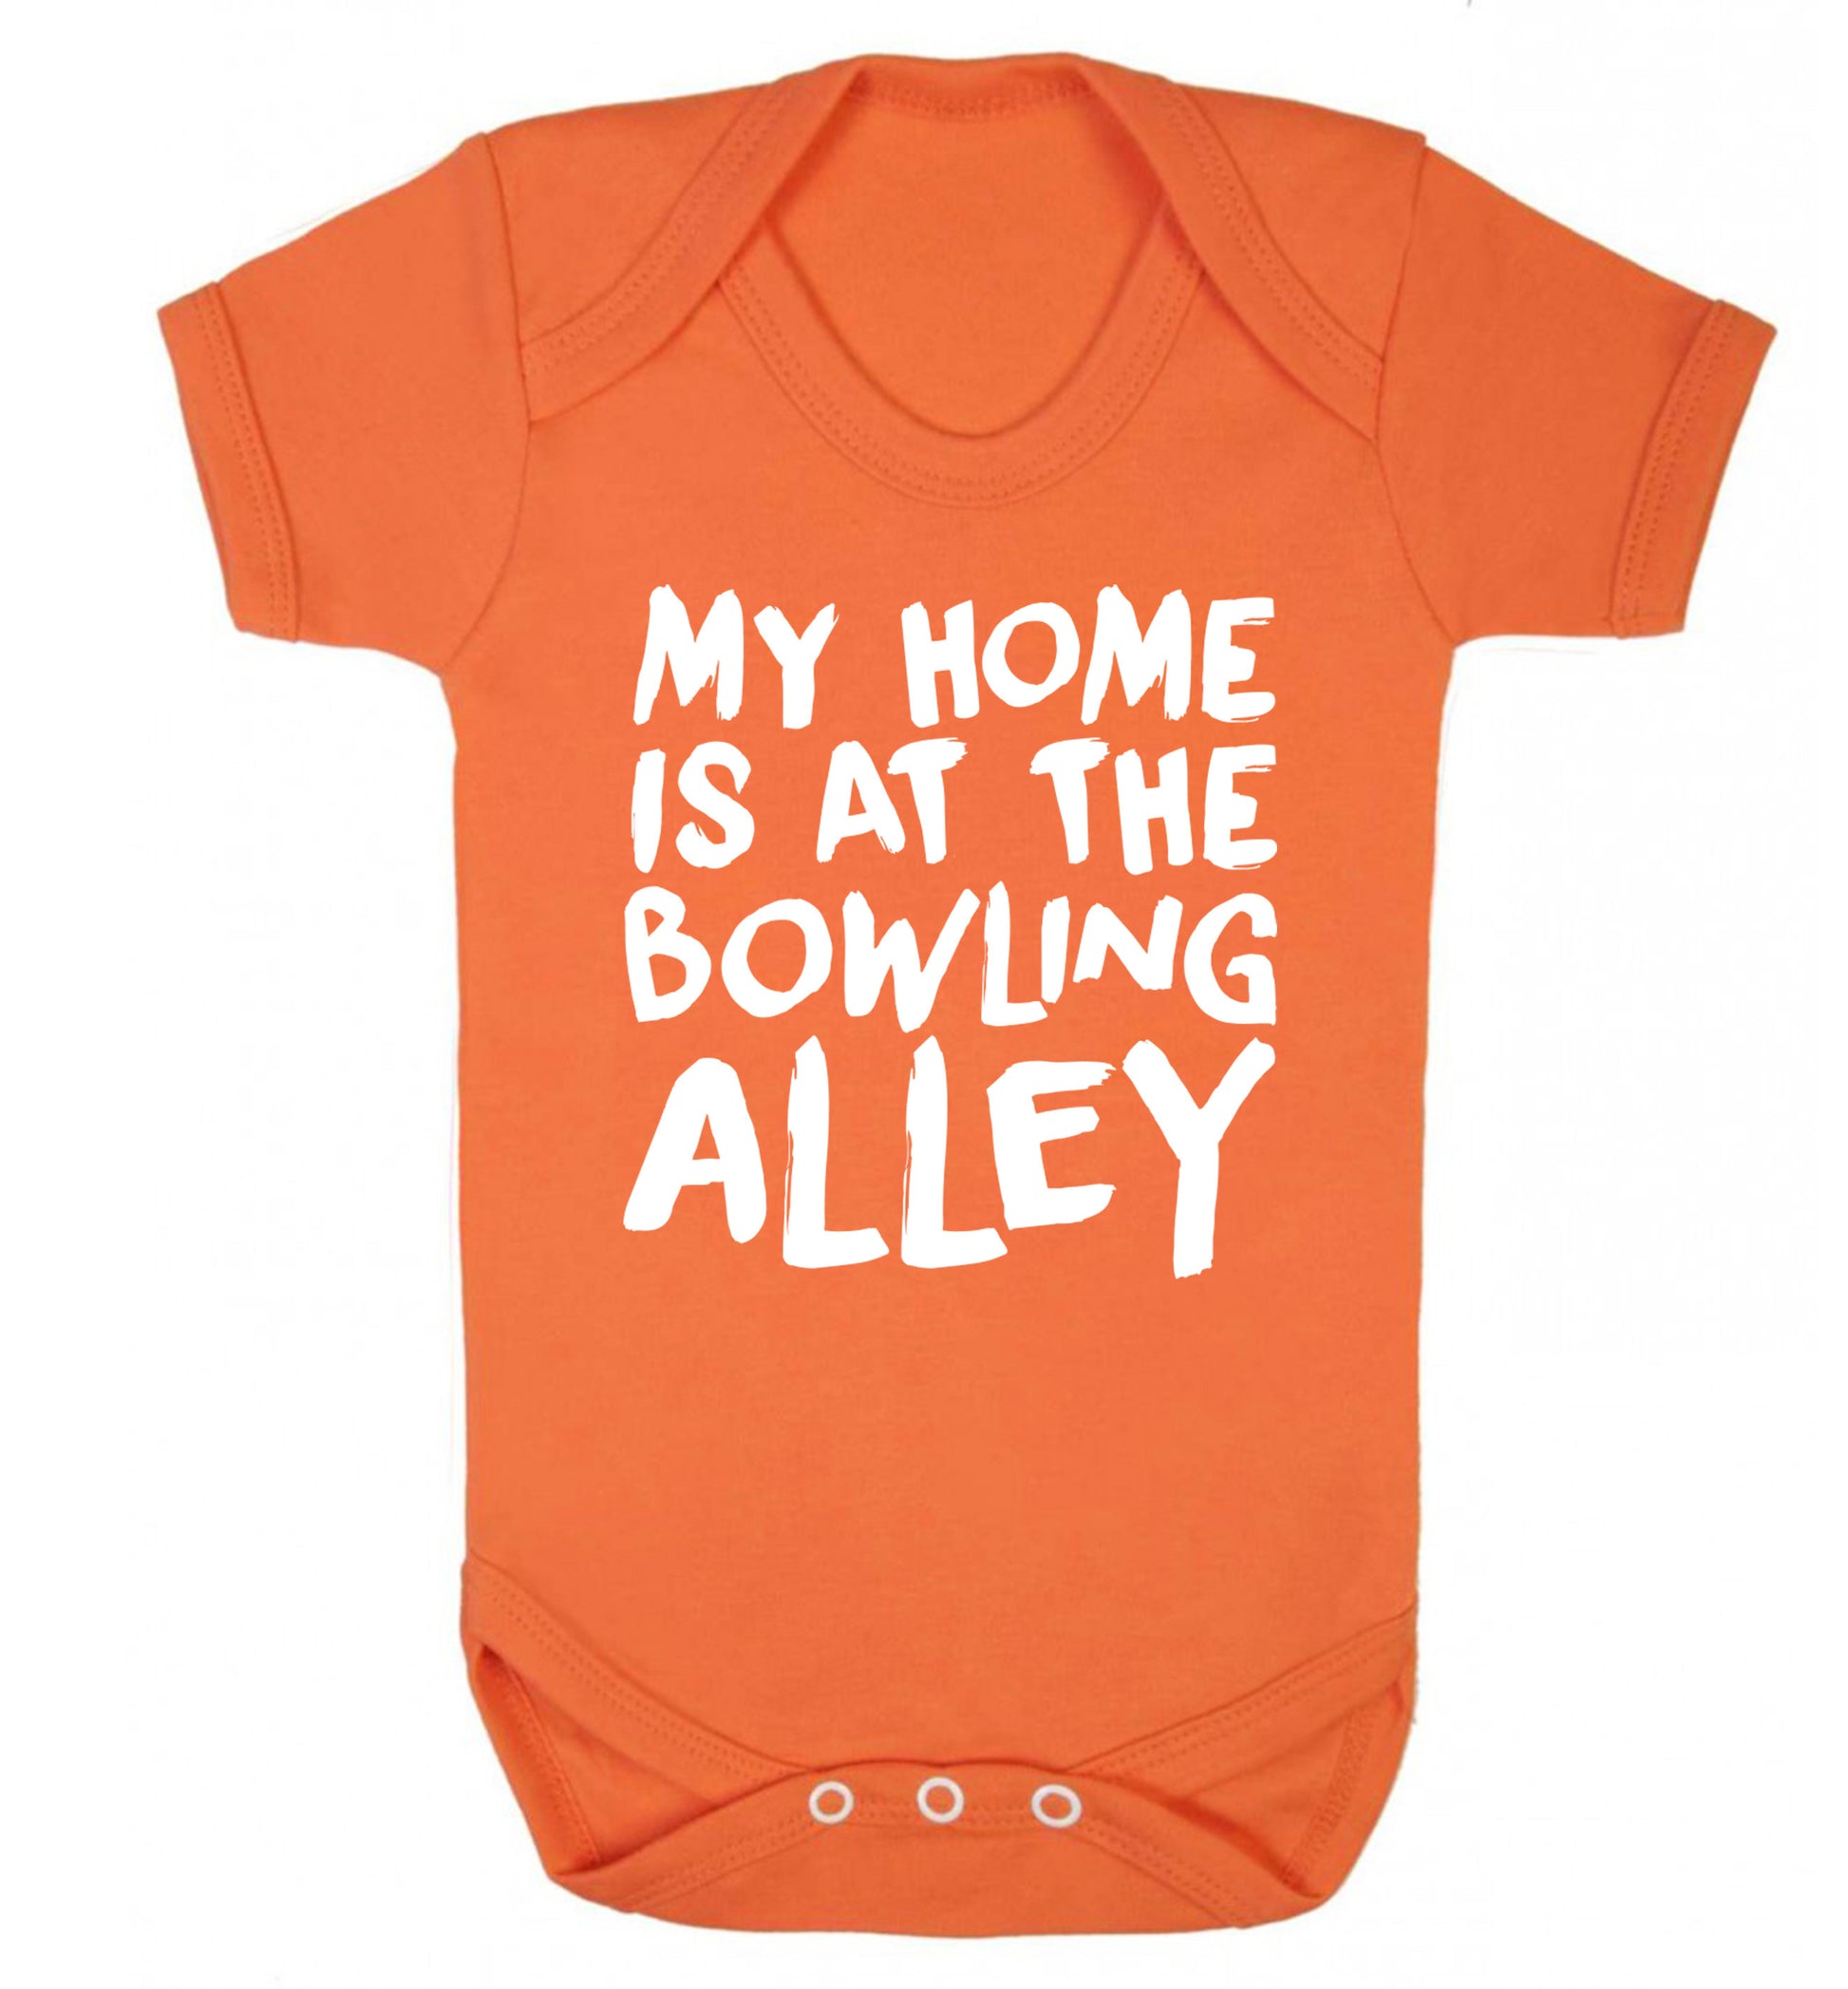 My home is at the bowling alley Baby Vest orange 18-24 months